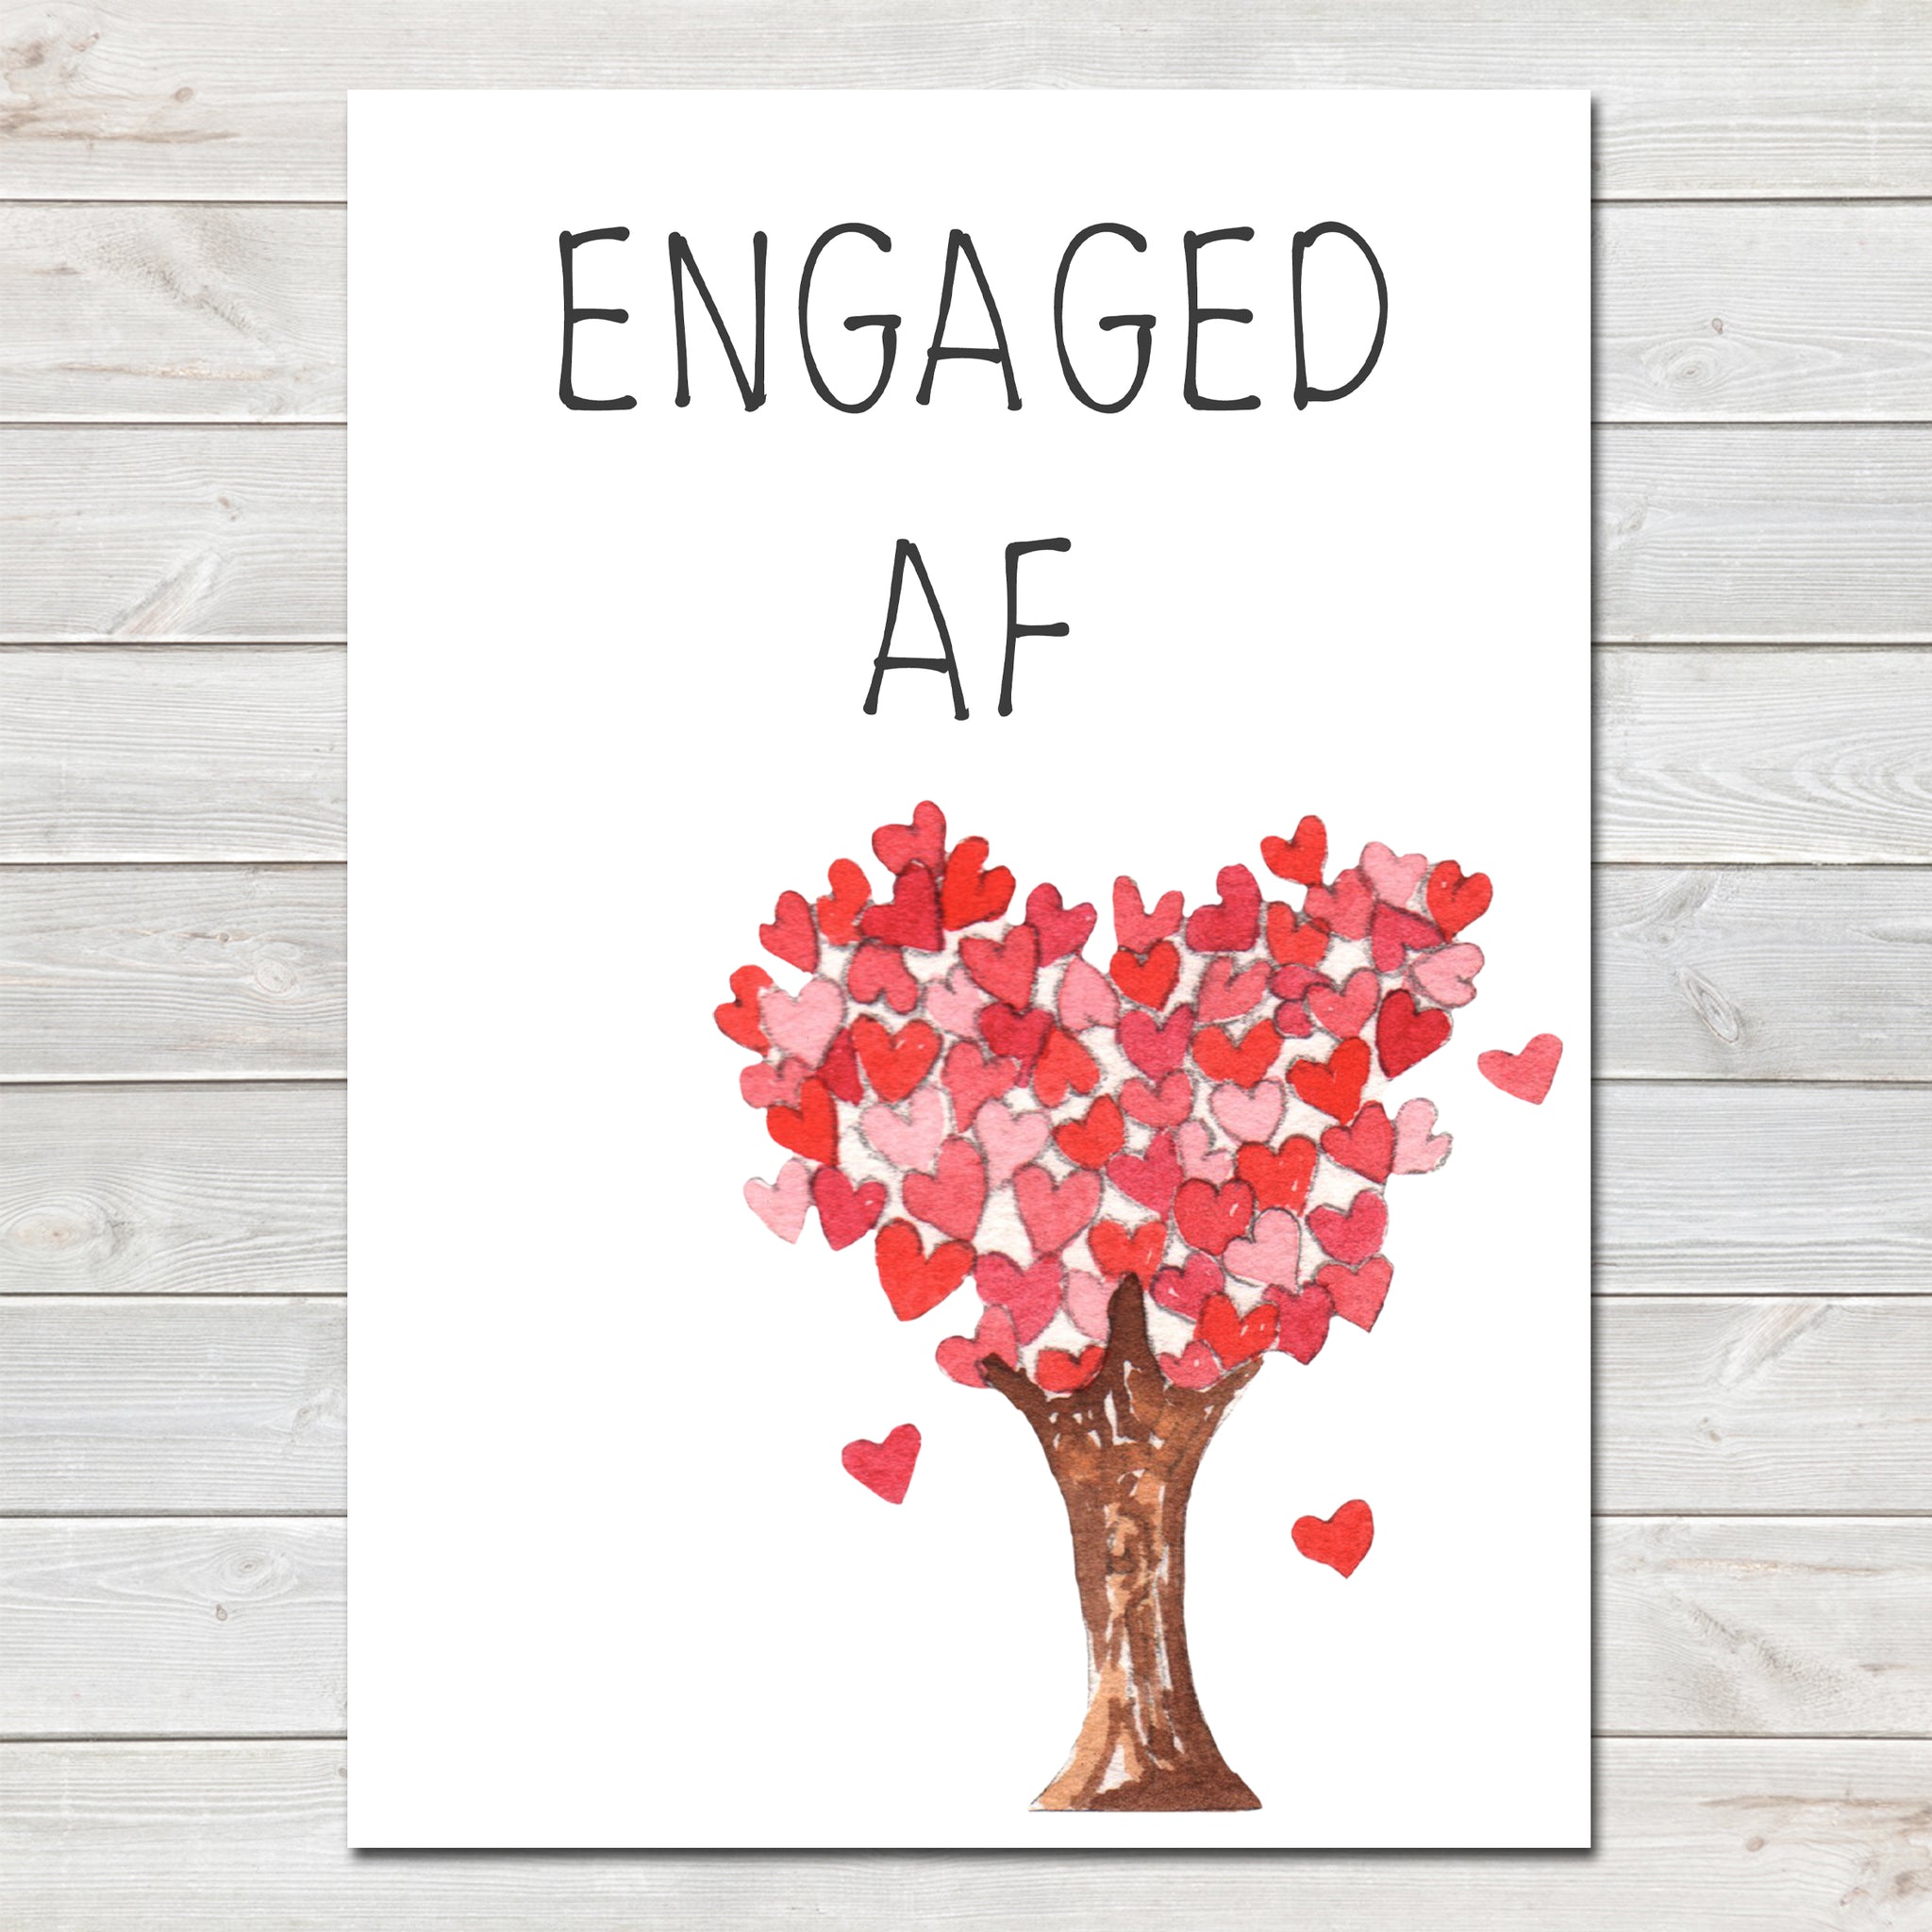 Engagement Party Engaged AF (As F***) Tree of Hearts Poster / Photo Prop / Sign